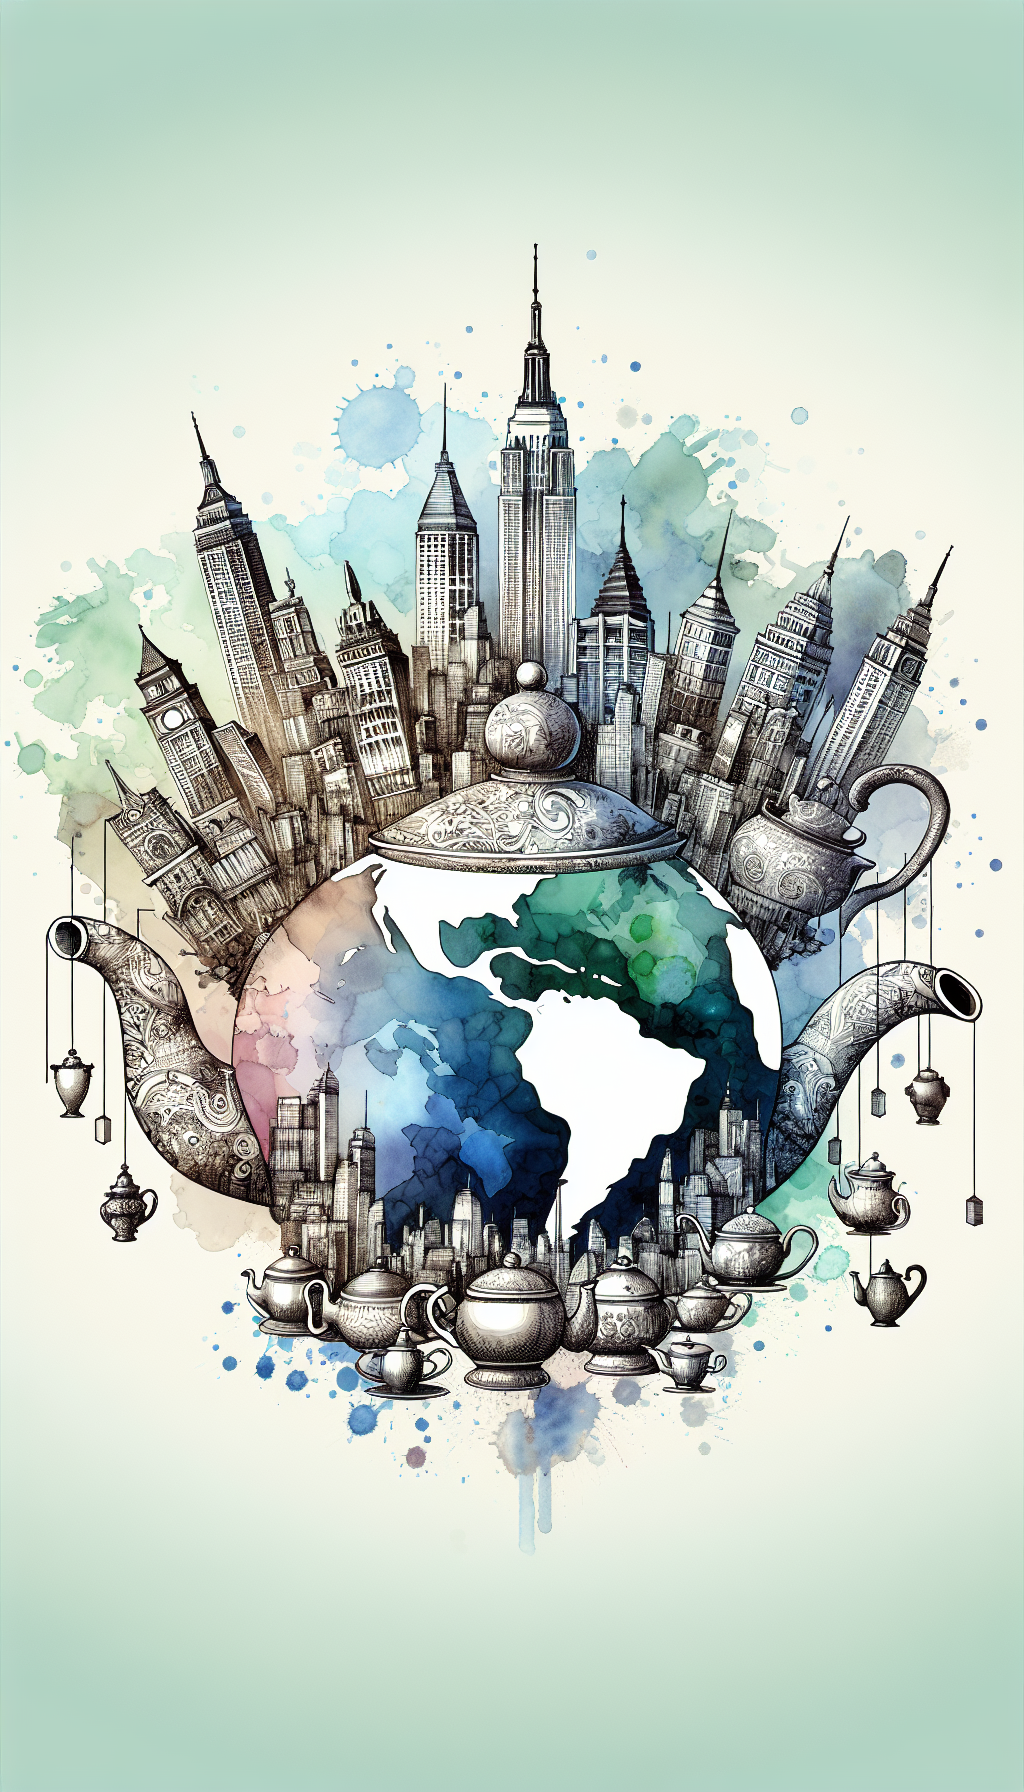 A whimsical, globe-spanning skyline where landmark silhouettes transform into intricate antique teapot spouts and handles, each echoing its cultural origin; in the foreground, a translucent world map teapot with price tags dangling off renowned teapots, symbolizing their varying values, all rendered in a fusion of watercolor splashes and fine line-art to evoke the melding of historic aesthetics and worth.